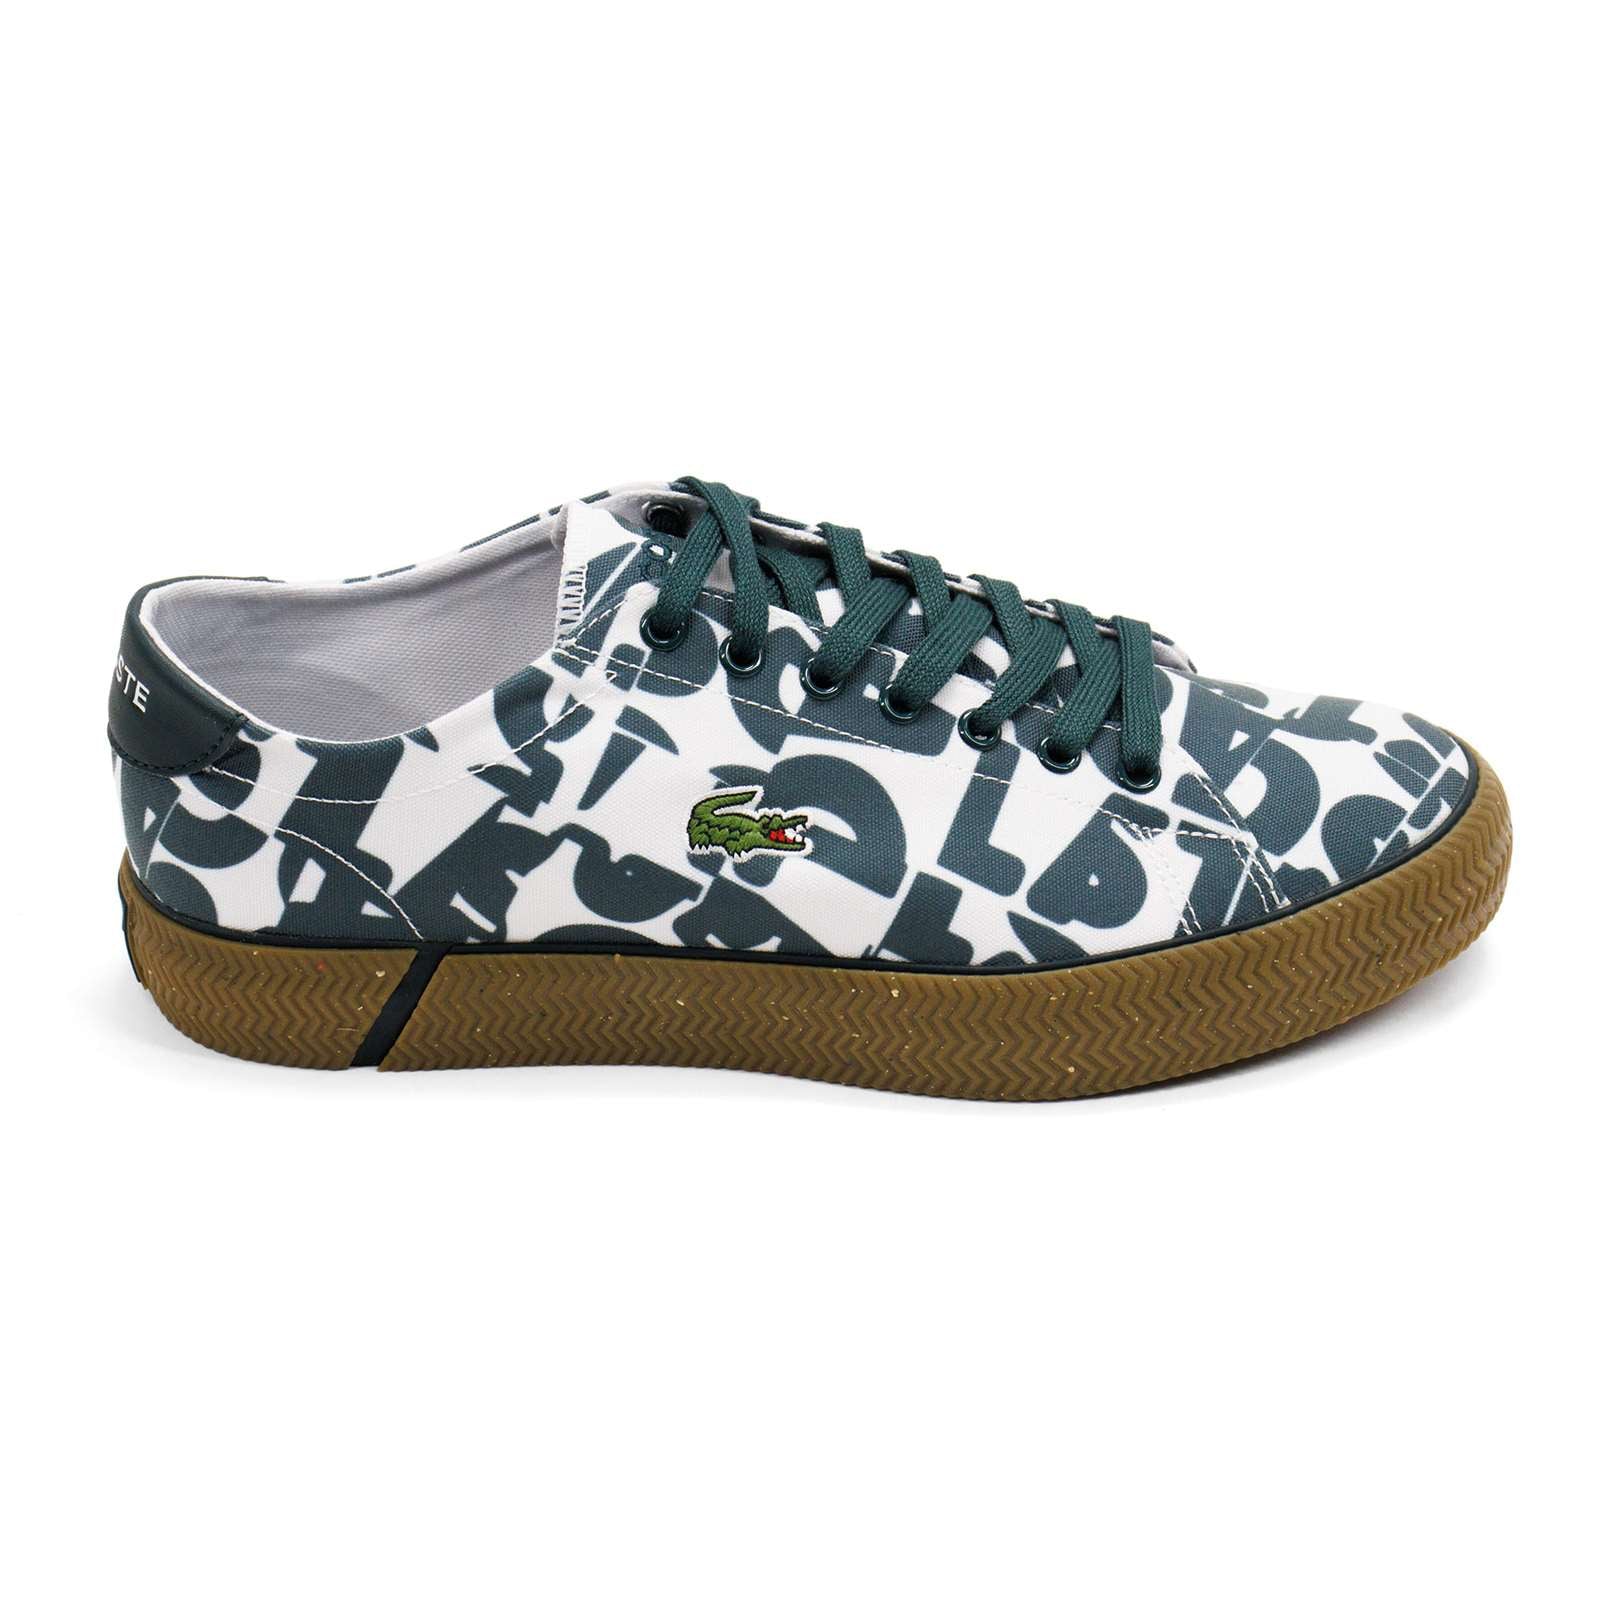 Lacoste Men Gripshot 0722 1 All-Over Print Canvas Casual Sneakers